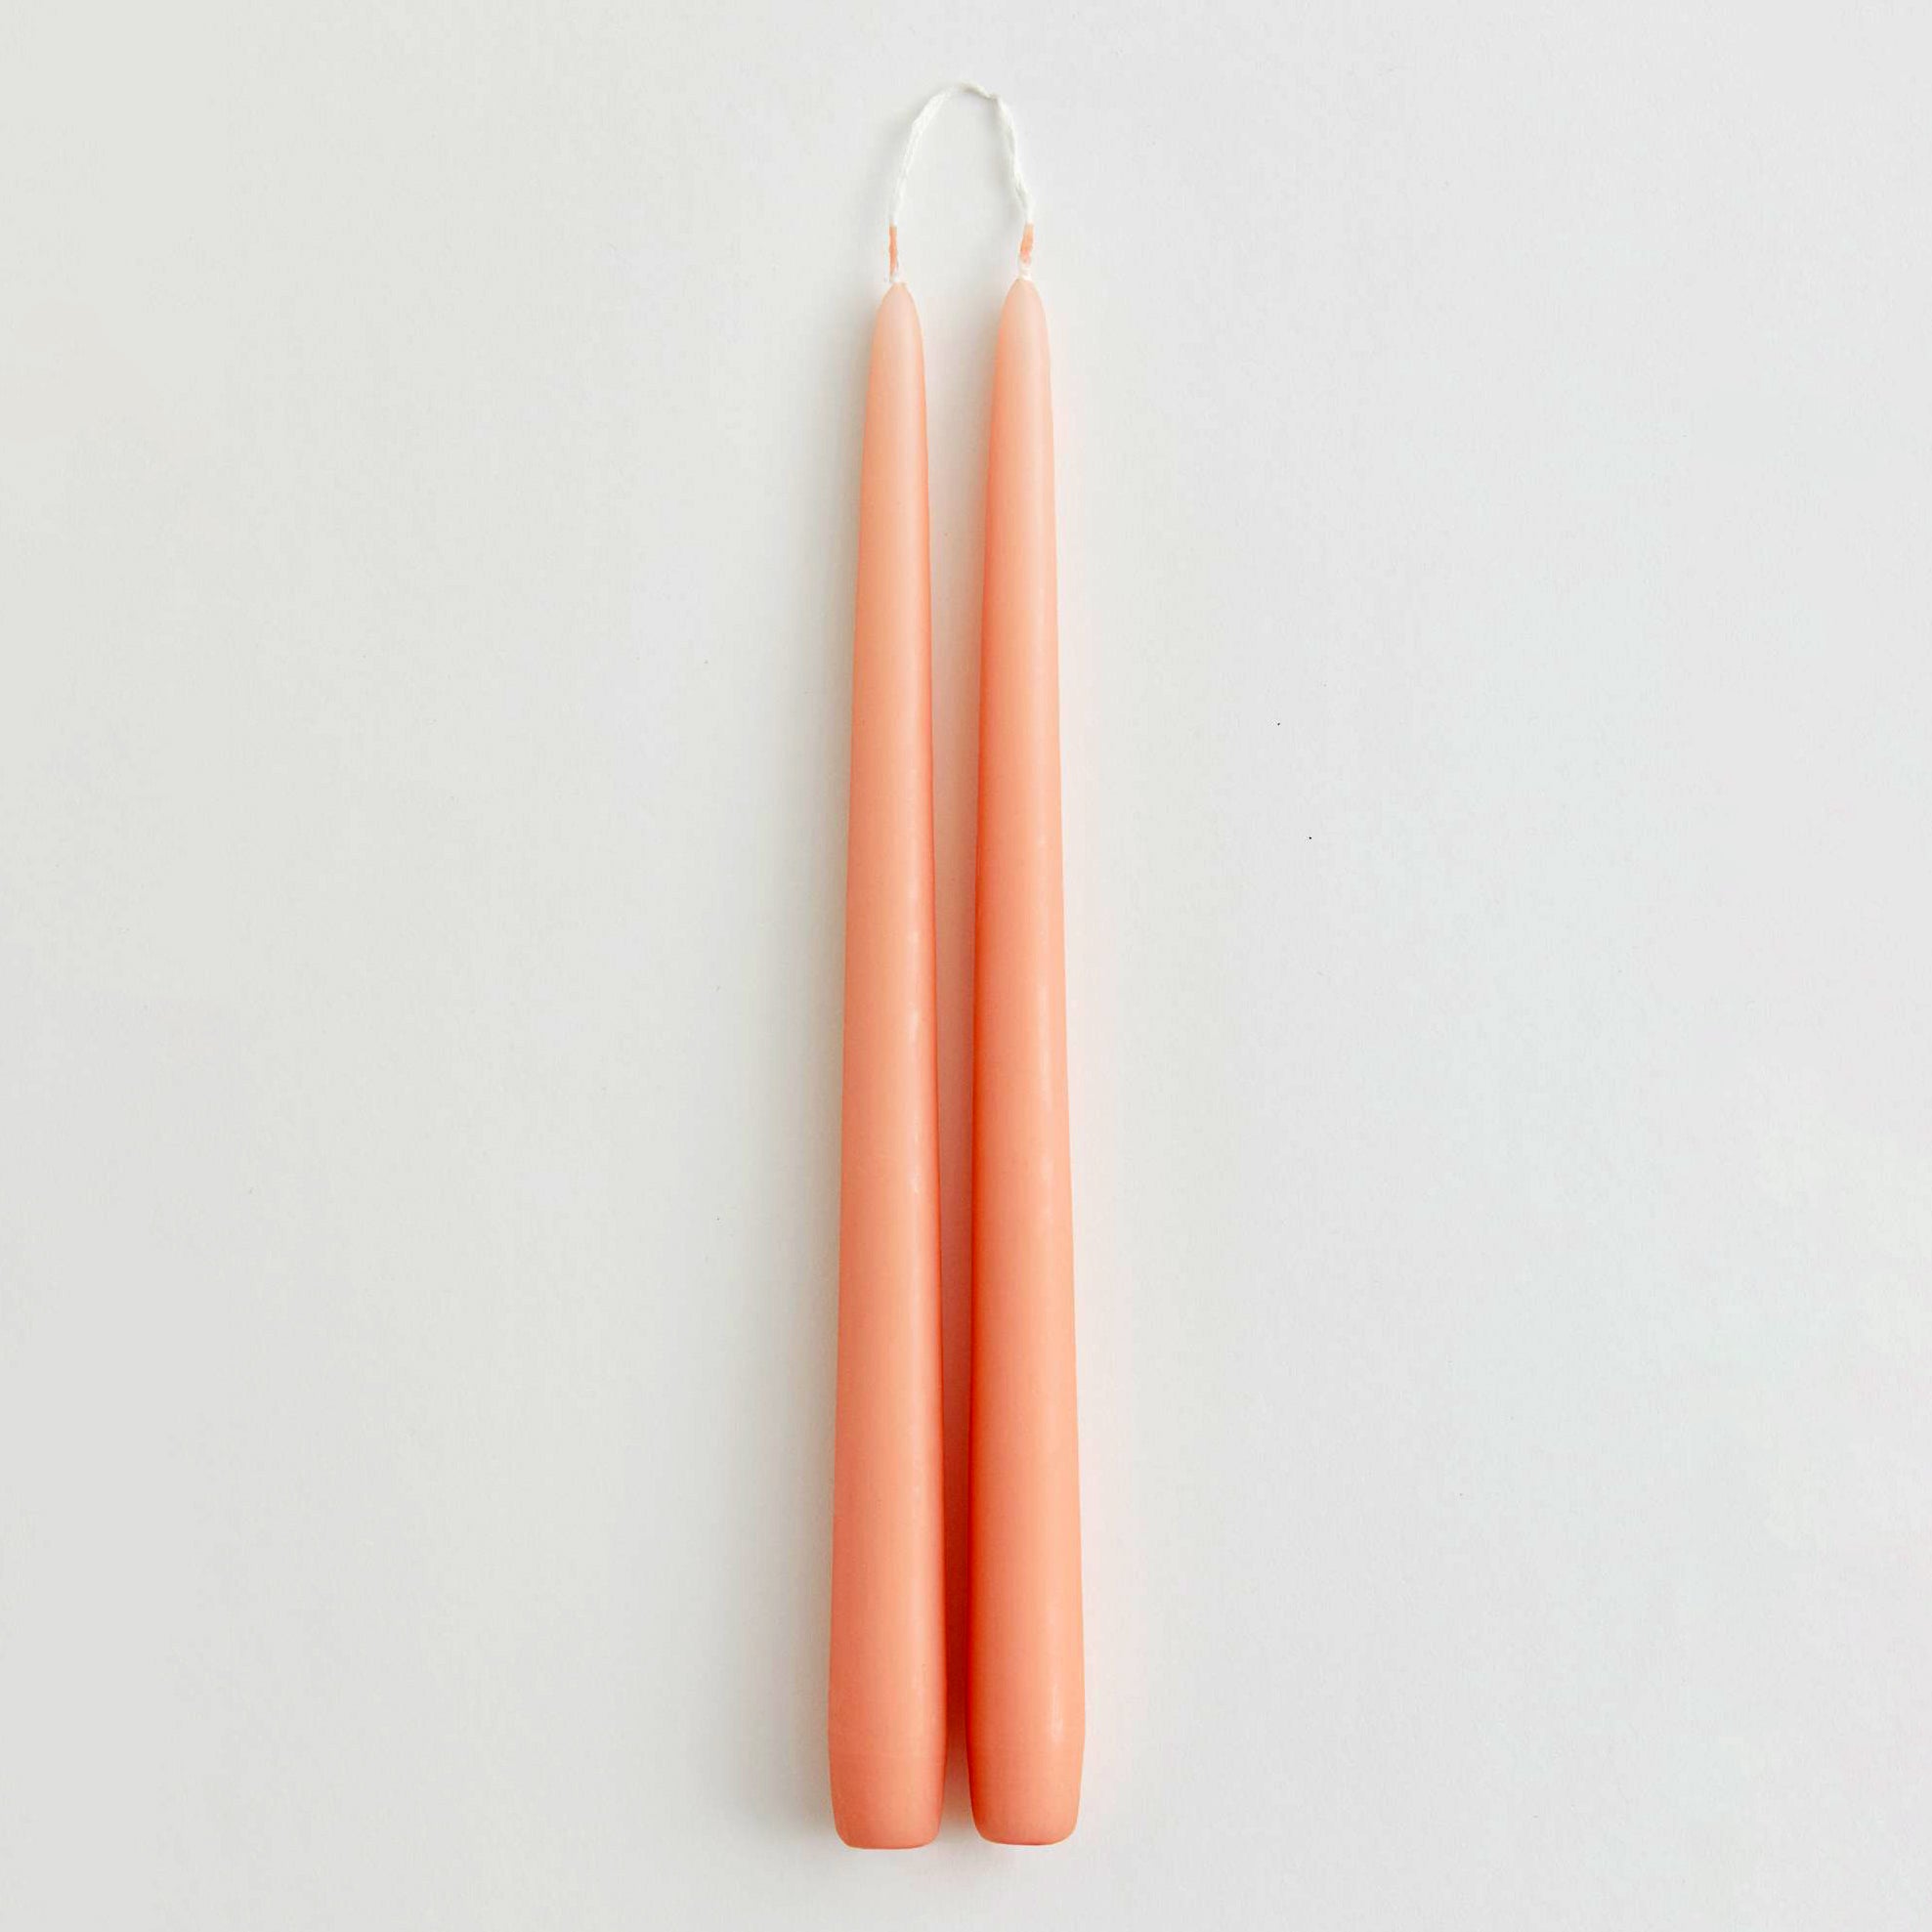 Peach 2-pack tapered candles.